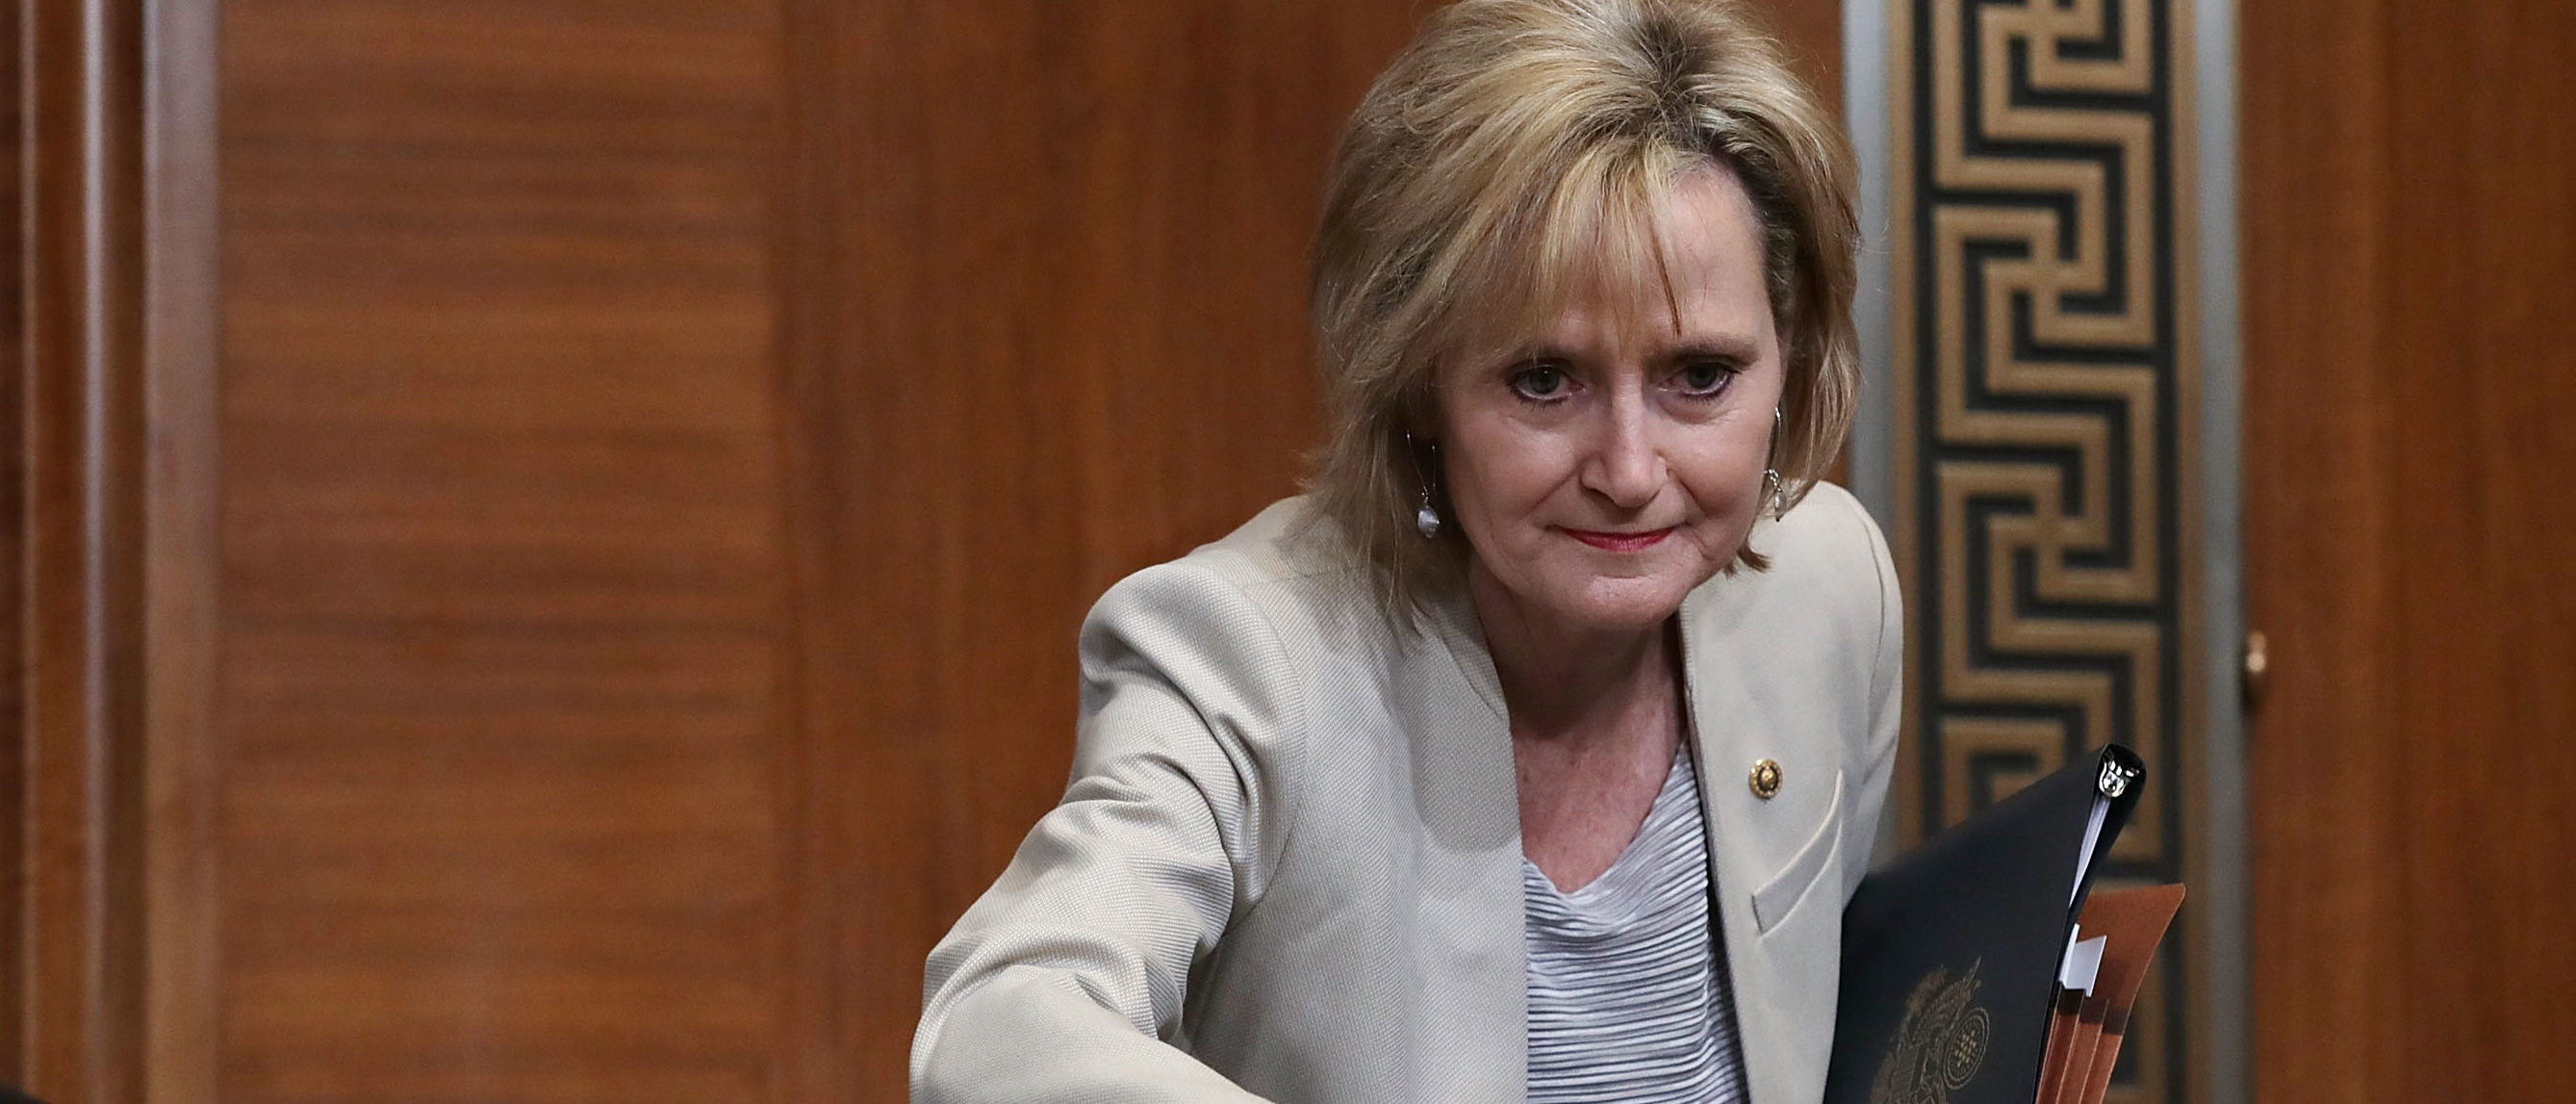 Sen. Cindy Hyde-Smith (R-MS) arrives for a hearing of the Senate Appropriations Committee's Interior, Environment, and Related Agencies Subcommittee with U.S. Interior Secretary Ryan Zinke in the Dirksen Senate Office Building on Capitol Hill May 10, 2018 in Washington, DC. (Chip Somodevilla/Getty Images)